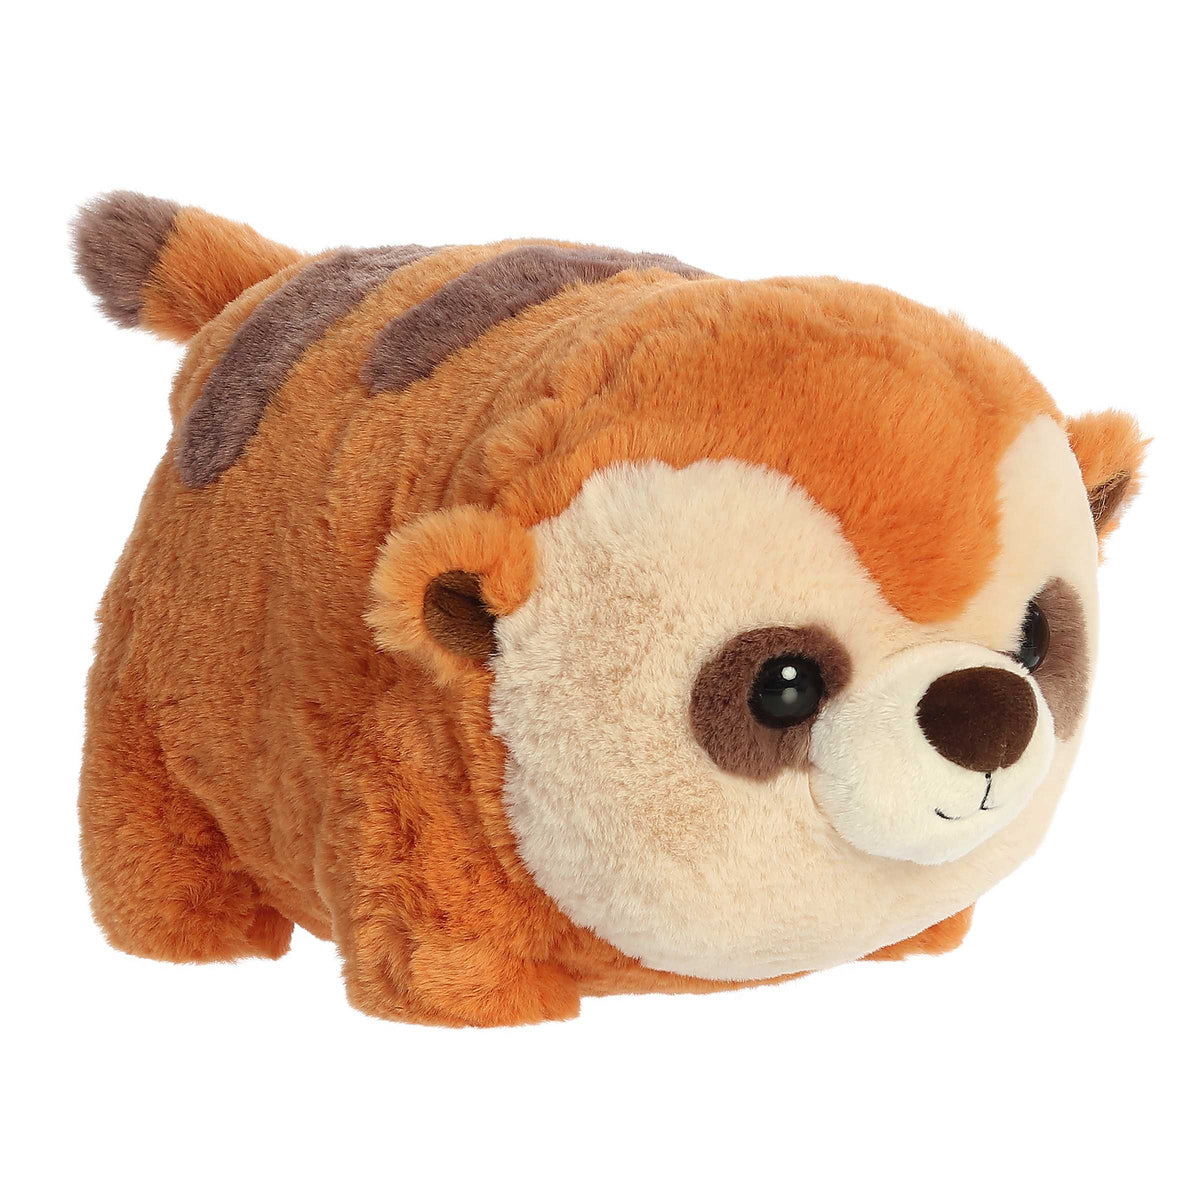 Marco Meerkat plush from Spudsters, a delightful potato-shaped plush with meerkat markings and perky ears